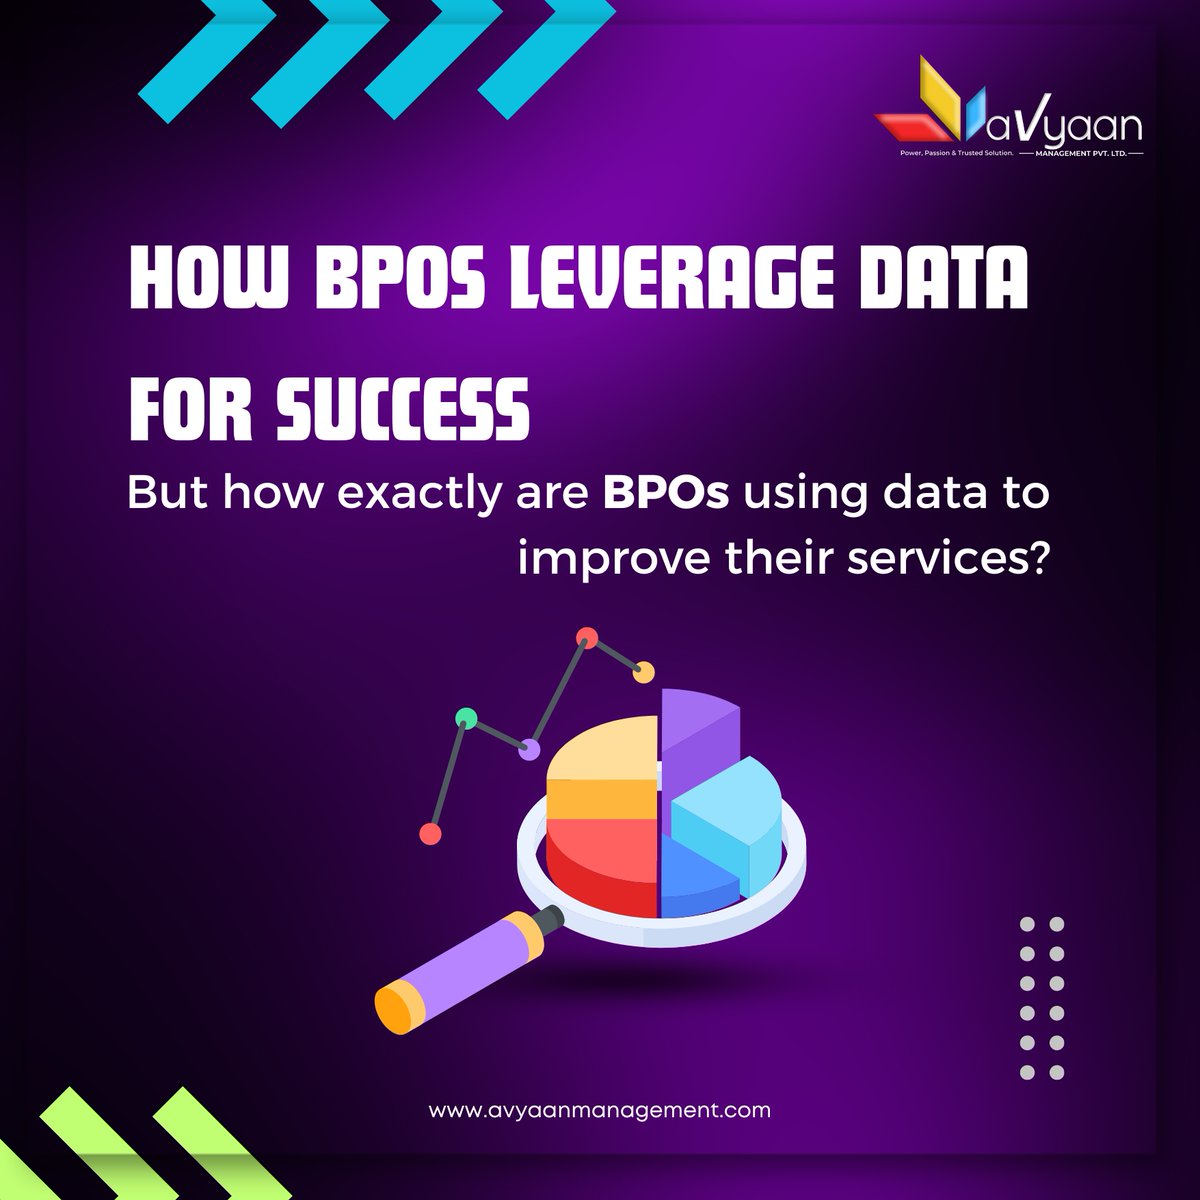 By collecting and analyzing data, BPOs can:

Enhance Customer Experience#CustomerCentric #DataDrivenService

Optimize Operations:#ProcessOptimization #BPOEfficiency

Boost Quality Control:#QualityAssurance #BPOExcellence

Make Informed Decisions: #DataDrivenDecisions